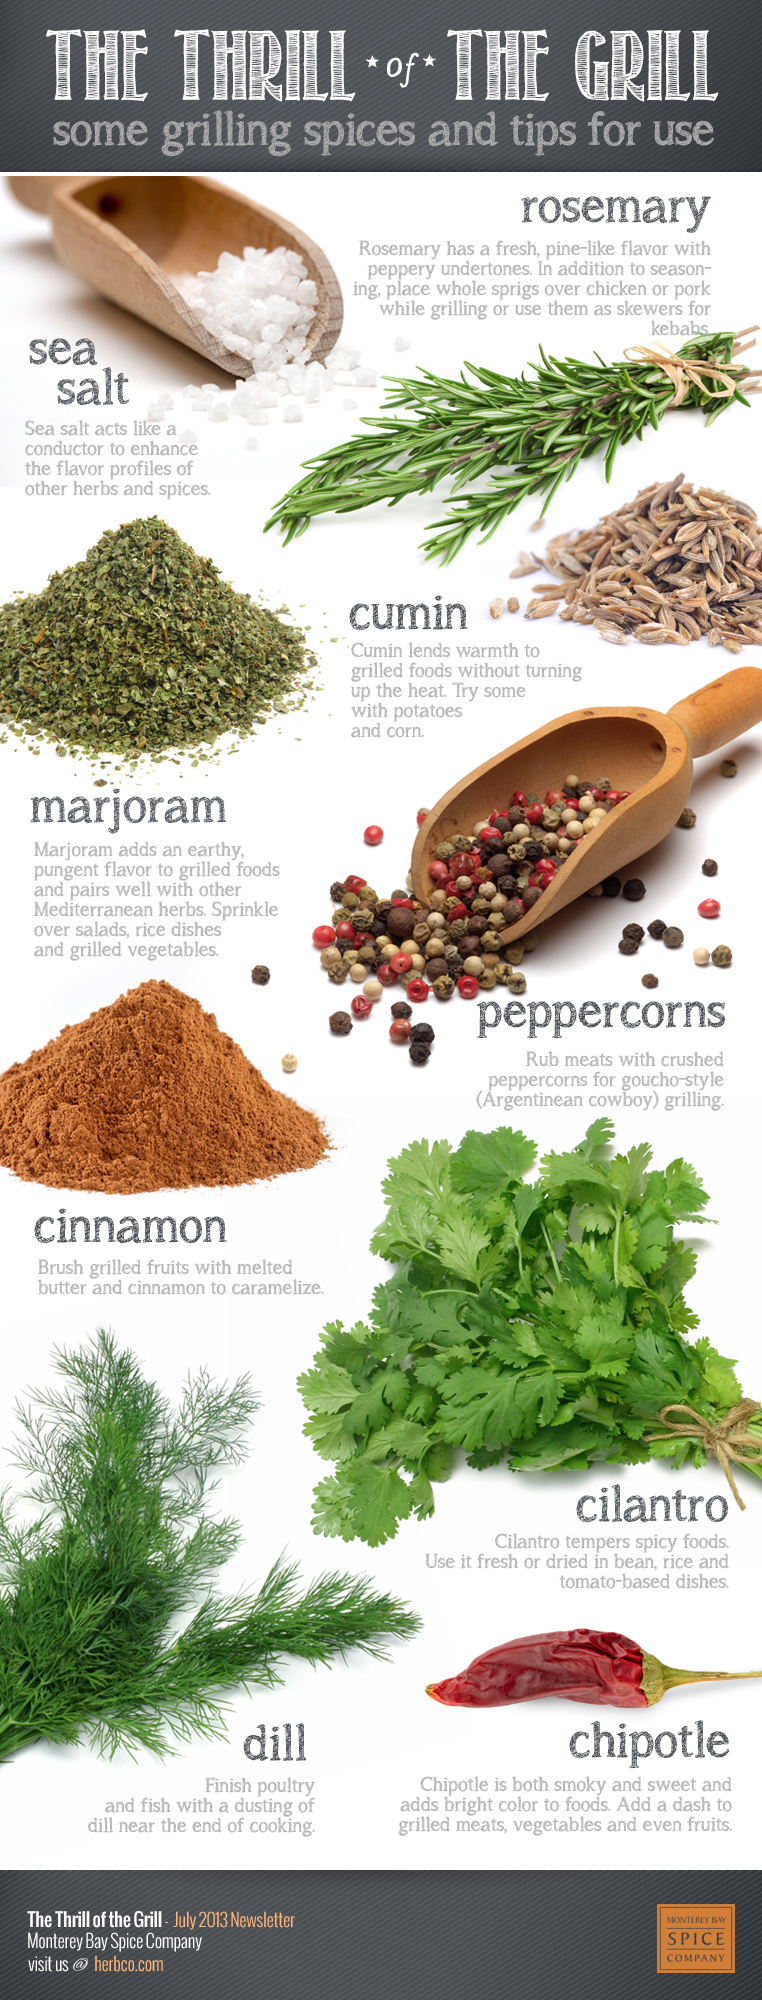 [ Info: Spices For Grilling ] Includes notes on: rosemary, cumin, marjoram, peppercorns, cinnamon, sea salt, cilantro, chipotle, and dill. ~ from Monterey Bay Herb Co